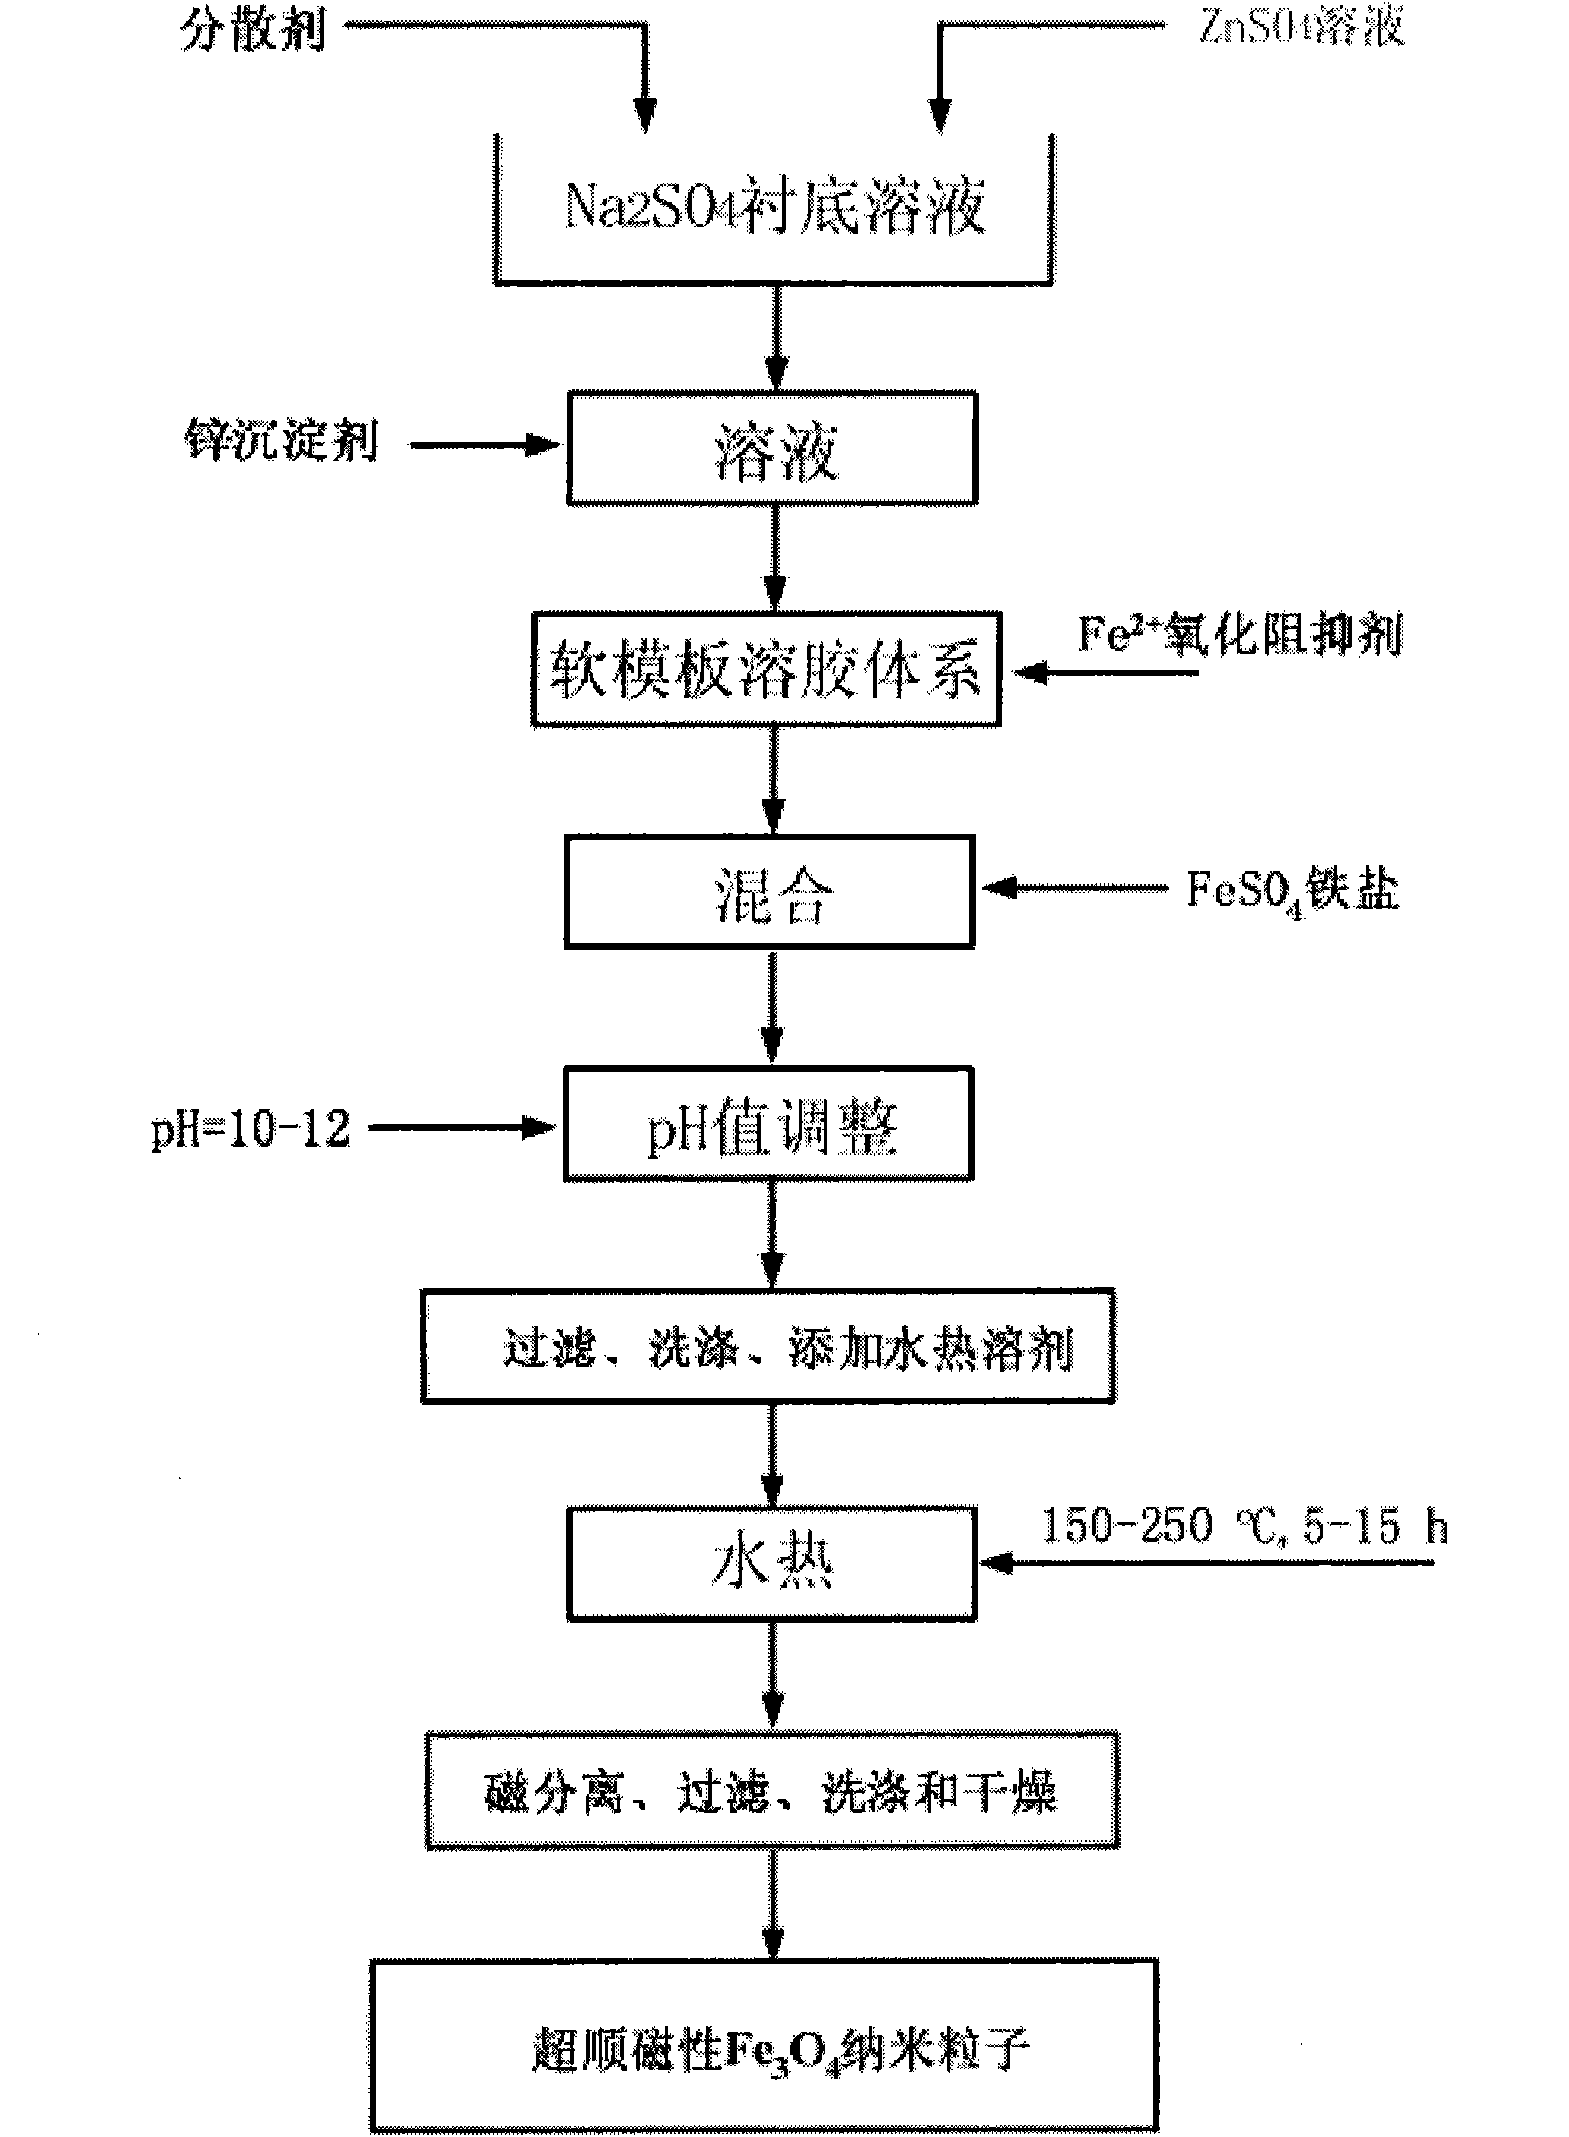 Method for preparing superparamagnetic Fe3O4 nano particle based on thermal decomposition of template